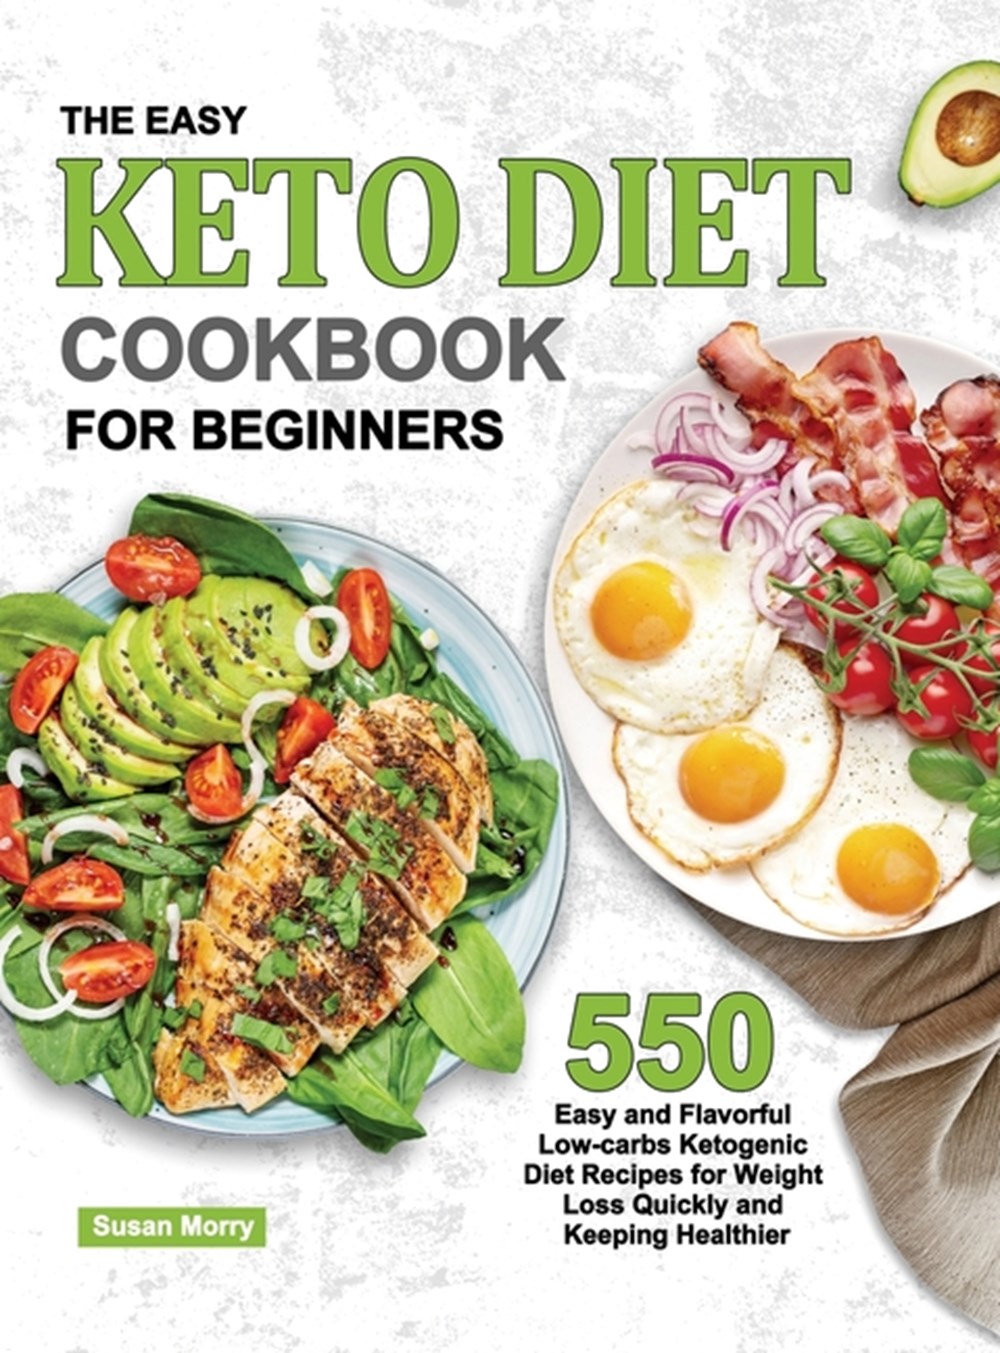 Buy The Easy Keto Diet Cookbook for Beginners: 550 Easy and Flavorful ...